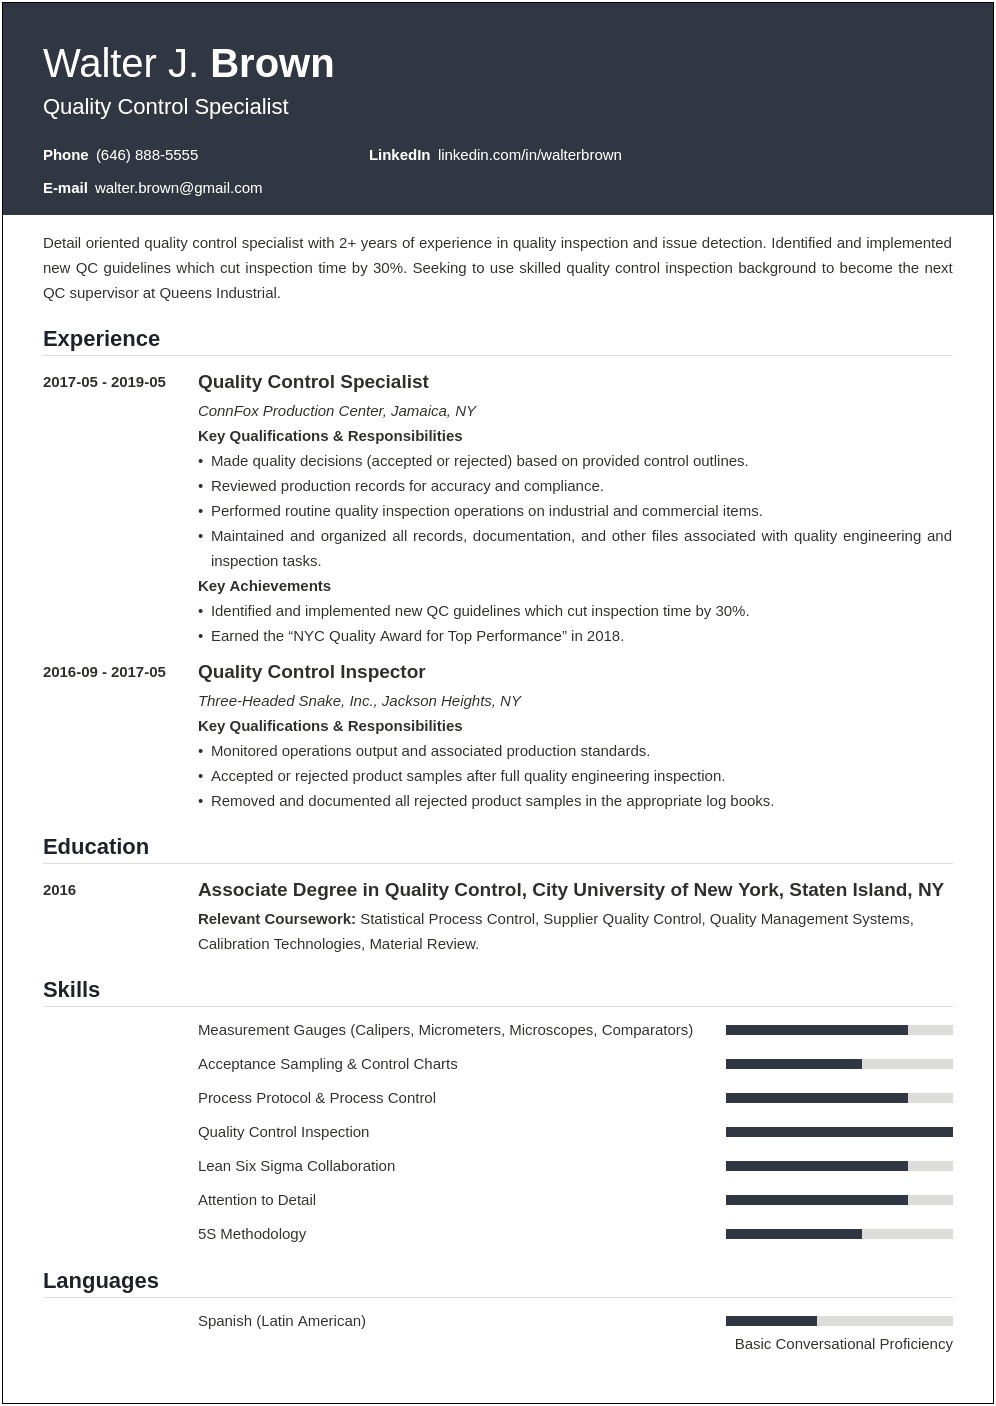 Pharmaceutical Industry Quality Analyst Professional Experience For Resume